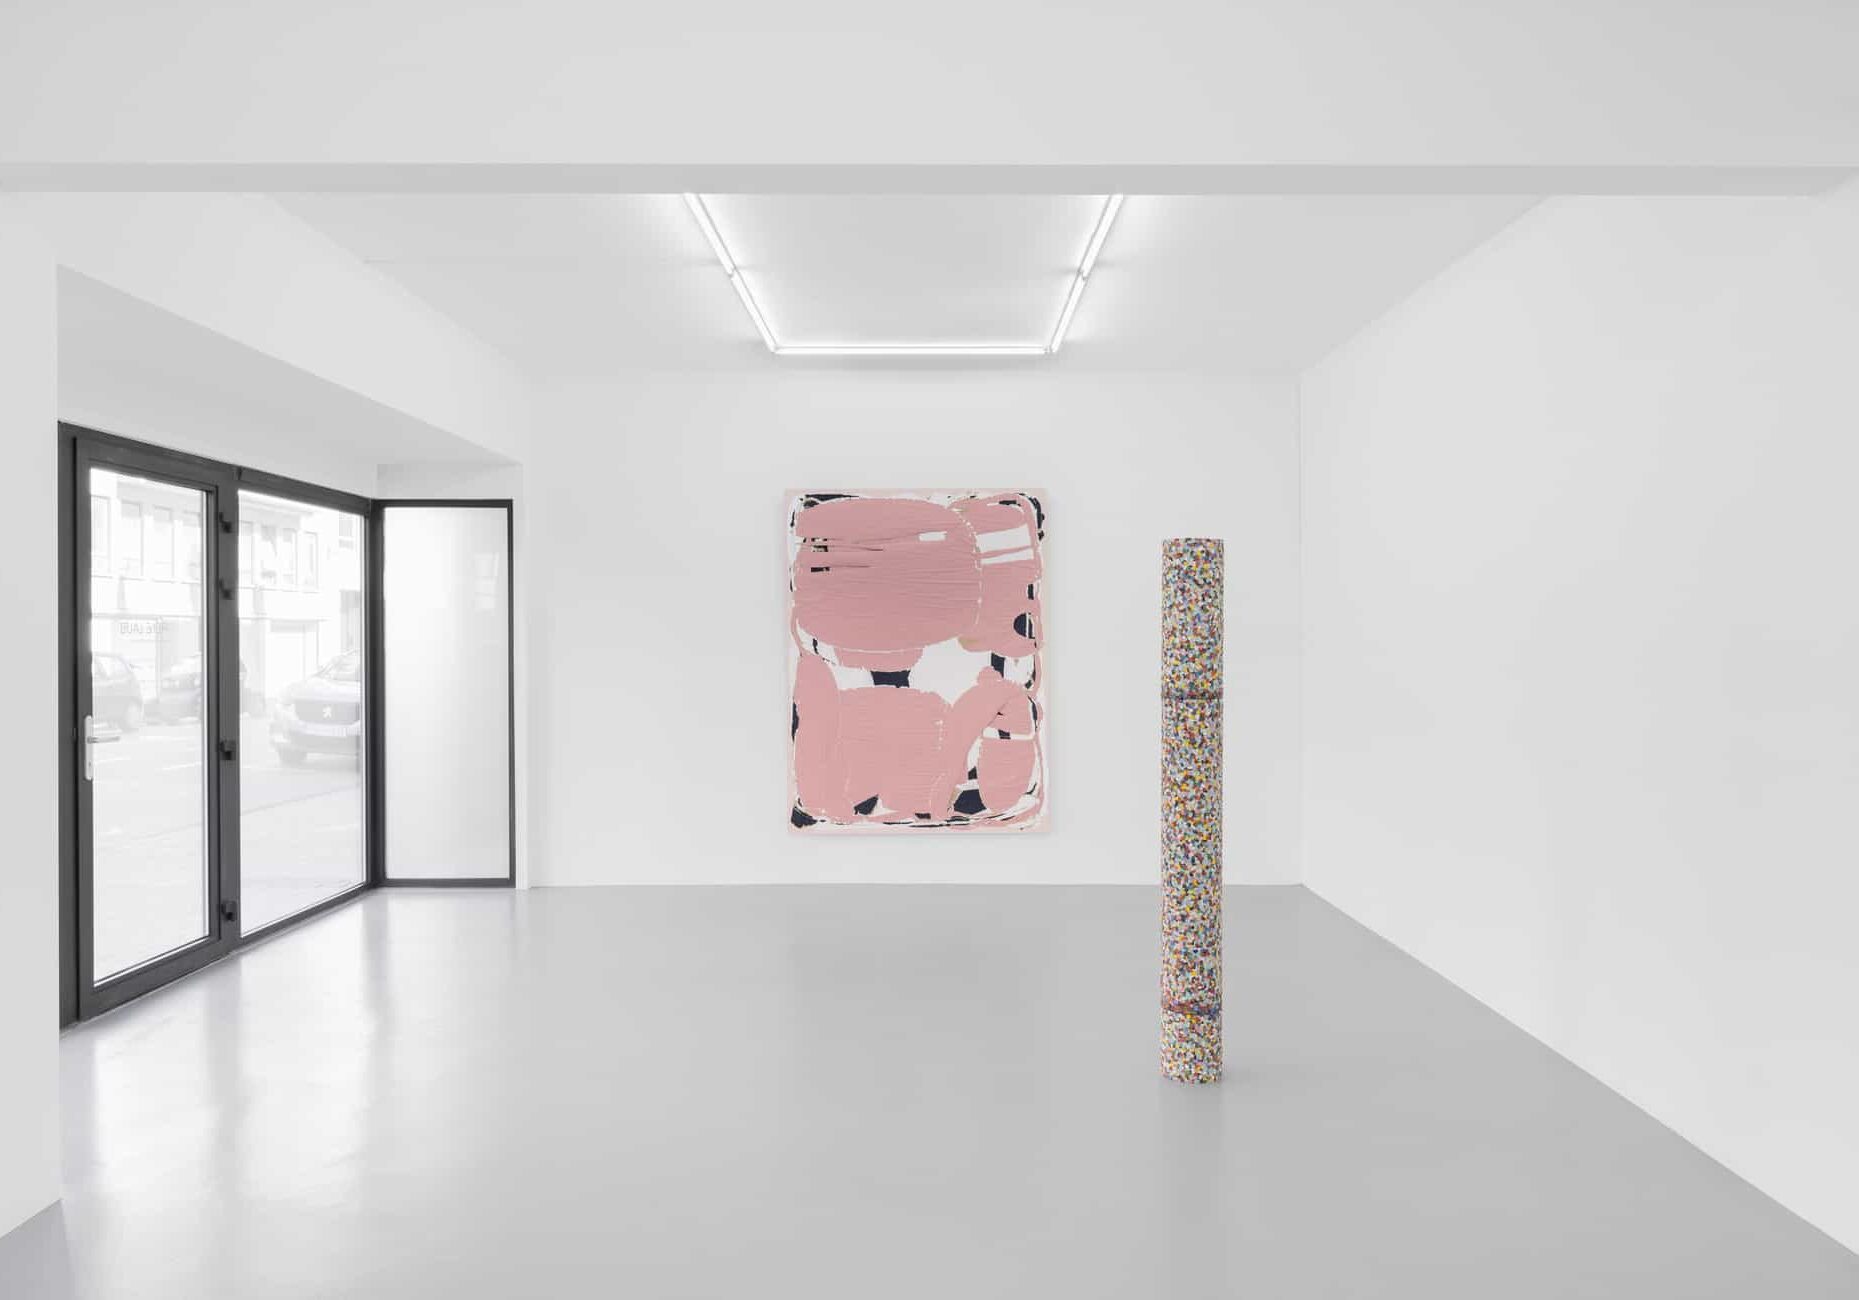 Guillermo Mora, exhibition view of A day with you, Irene Laub Gallery, Brussels (BE), 2021 (Courtesy the Artist and Irène Laub Gallery)